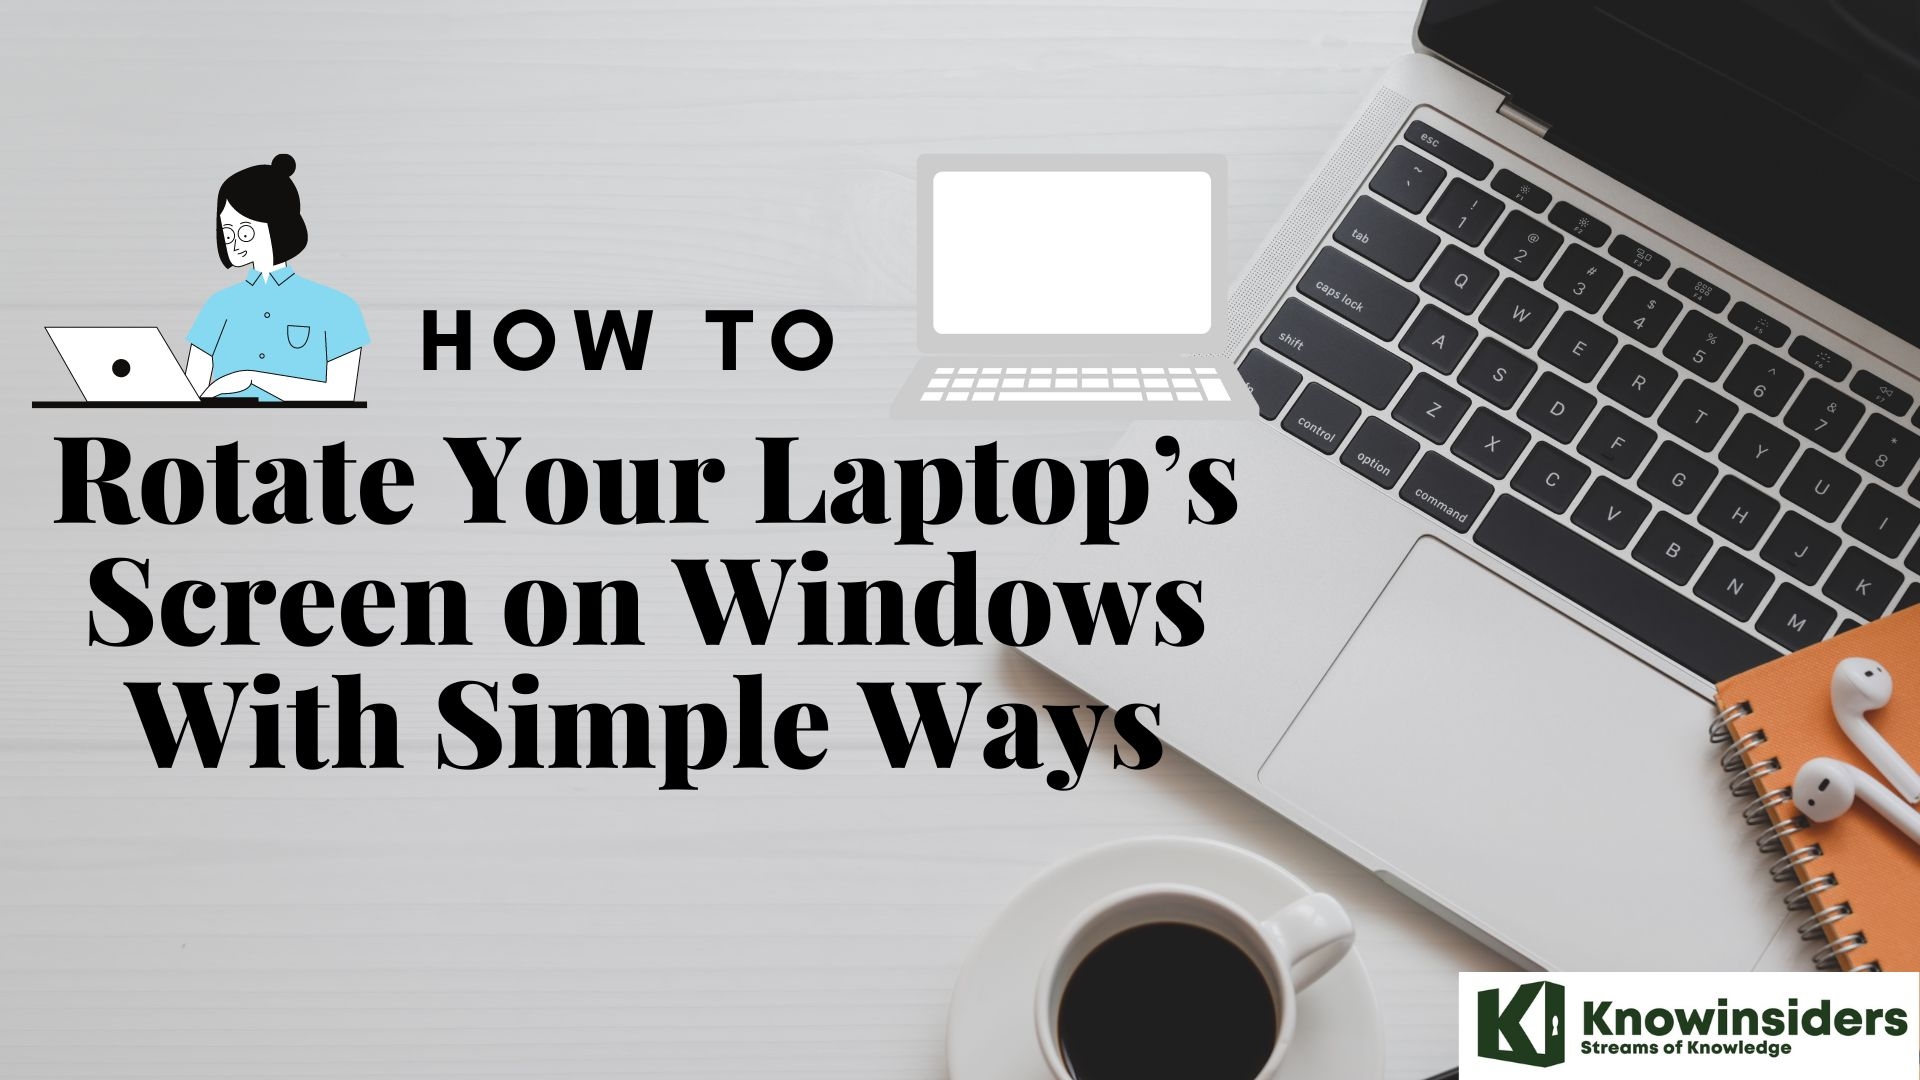 4 Simple Ways to Rotate Your Laptop’s Screen on Windows